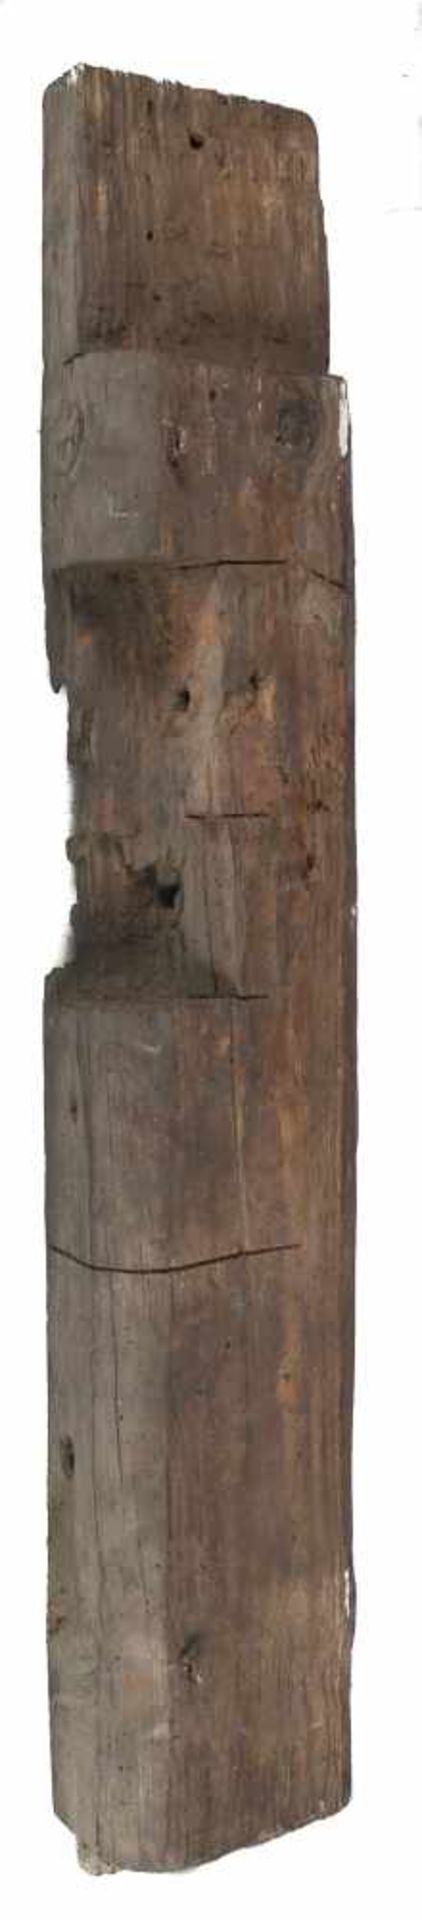 Lot of three carved wooden beams. 17th – 18th century. 115 x 16 x 8 cm., 112 x 19 x 12 cm, and 220 x - Image 5 of 6